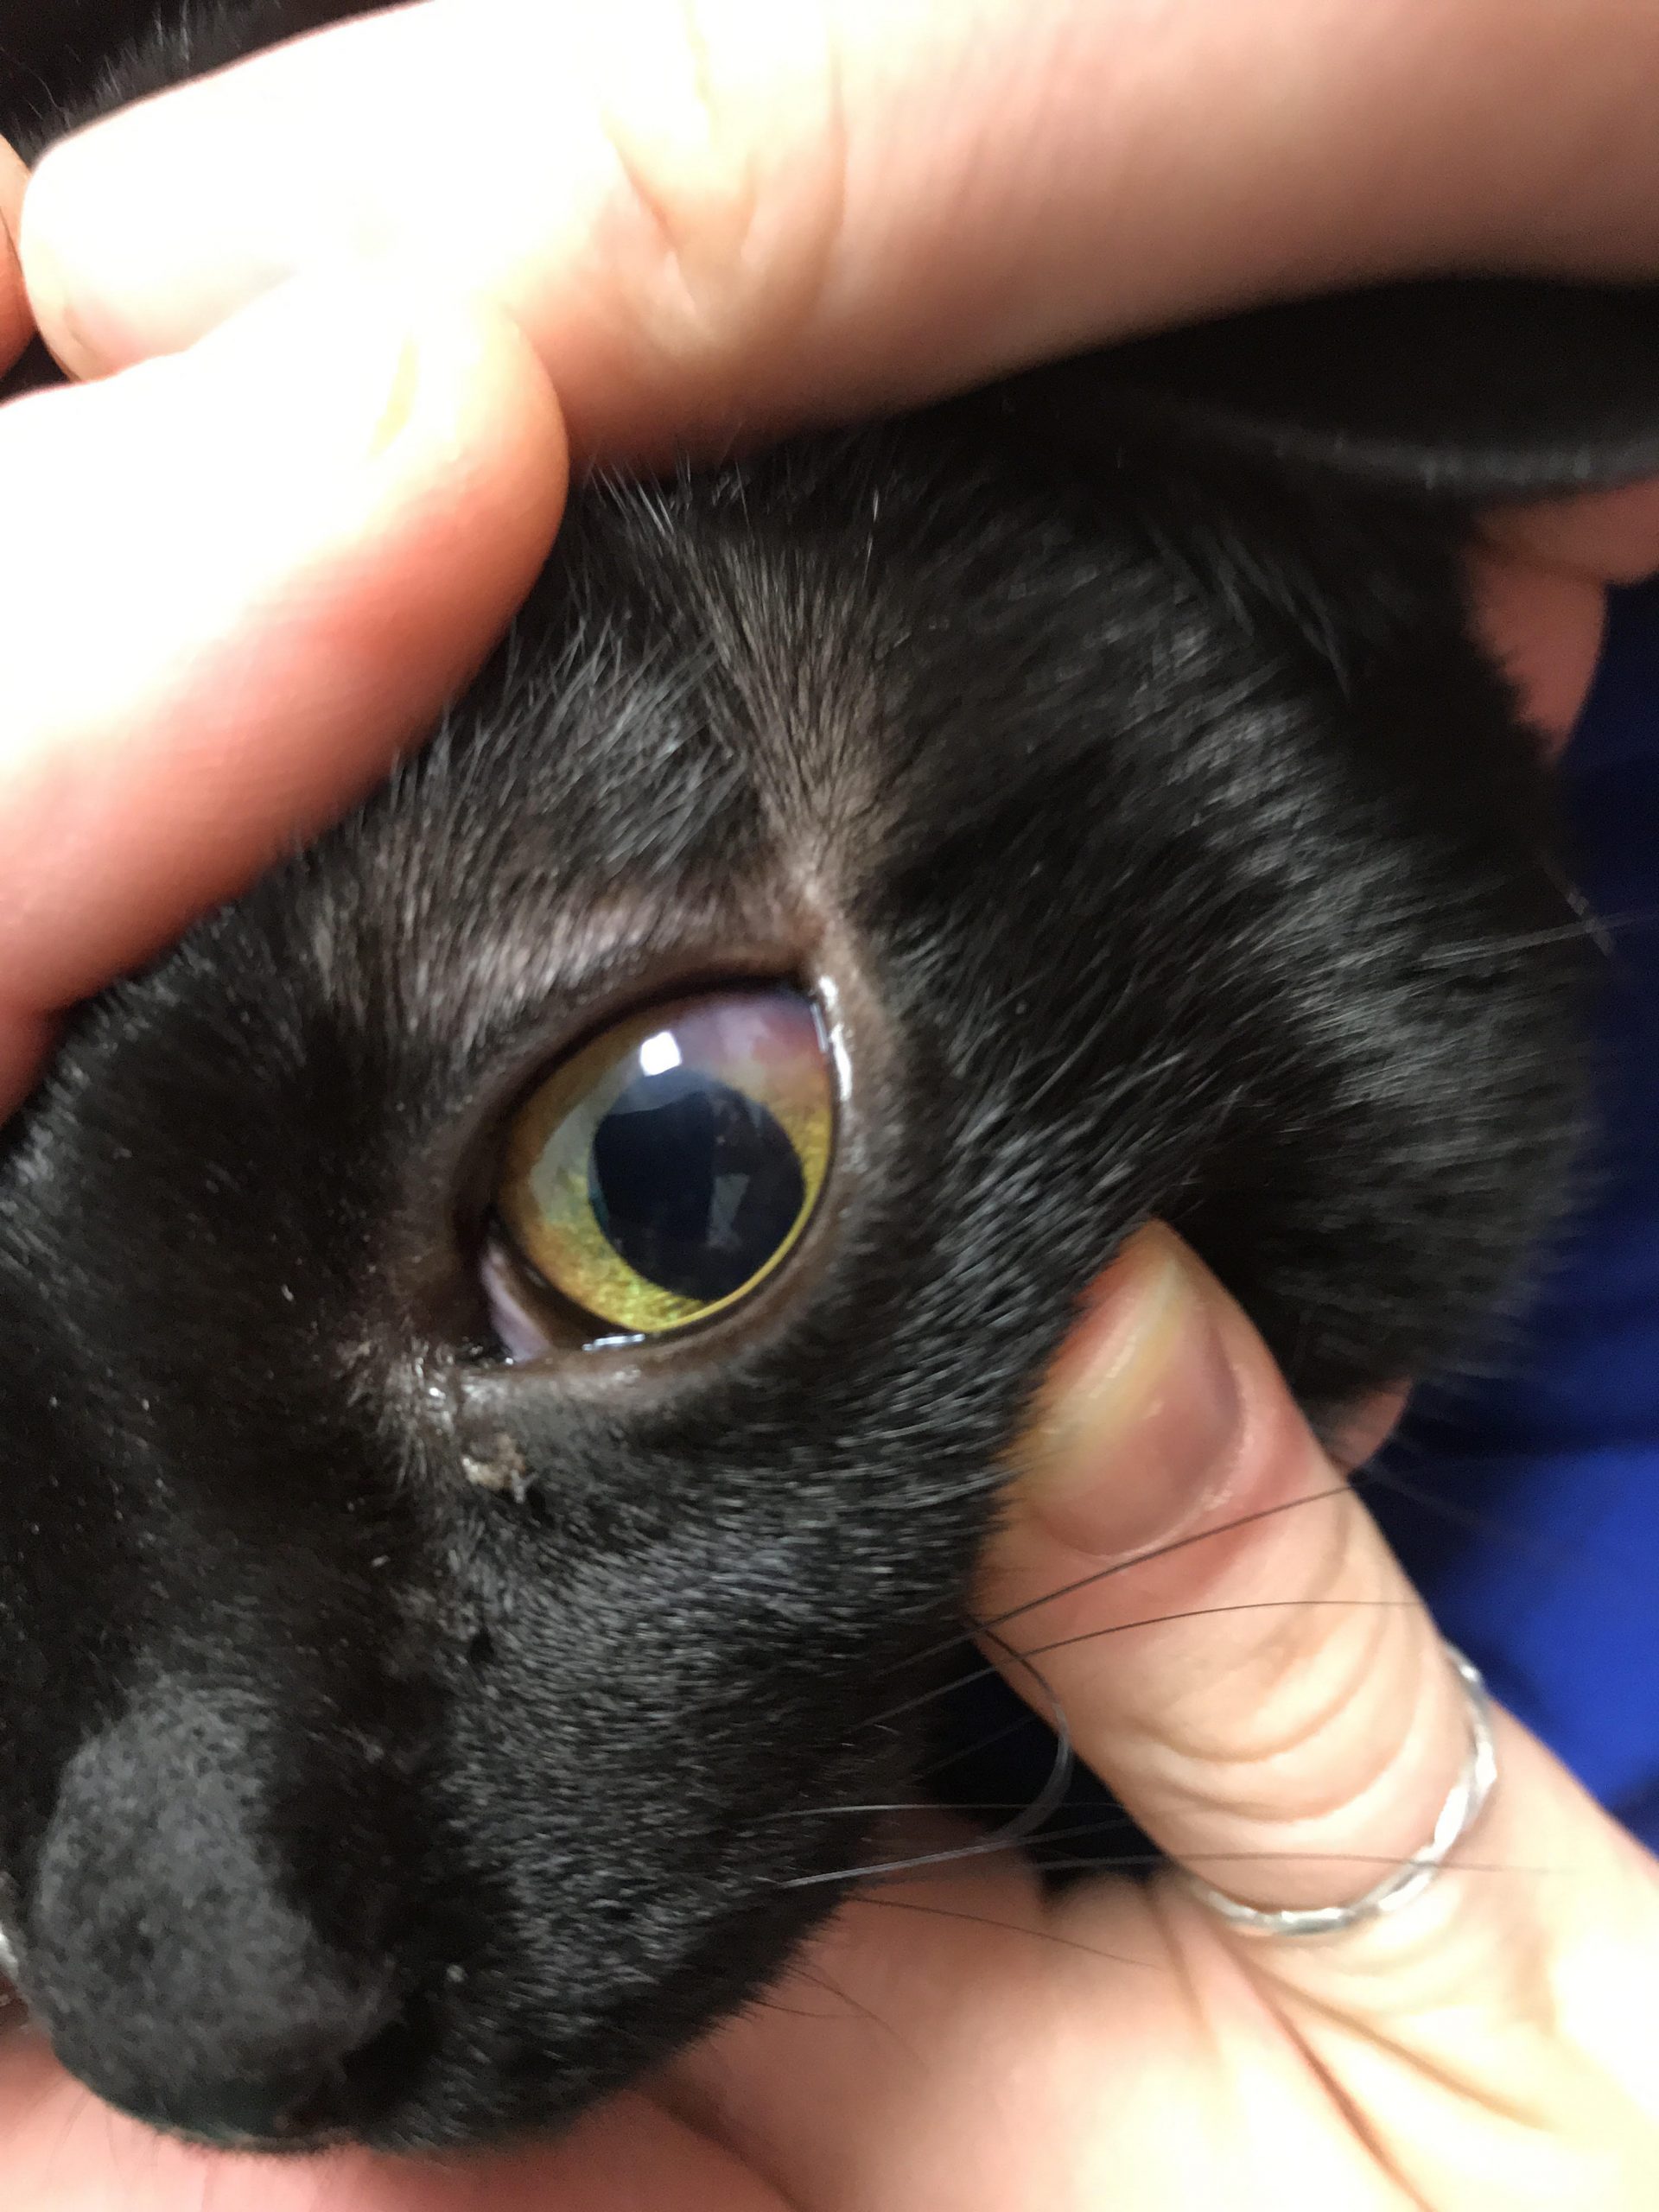 Cat with uveitis